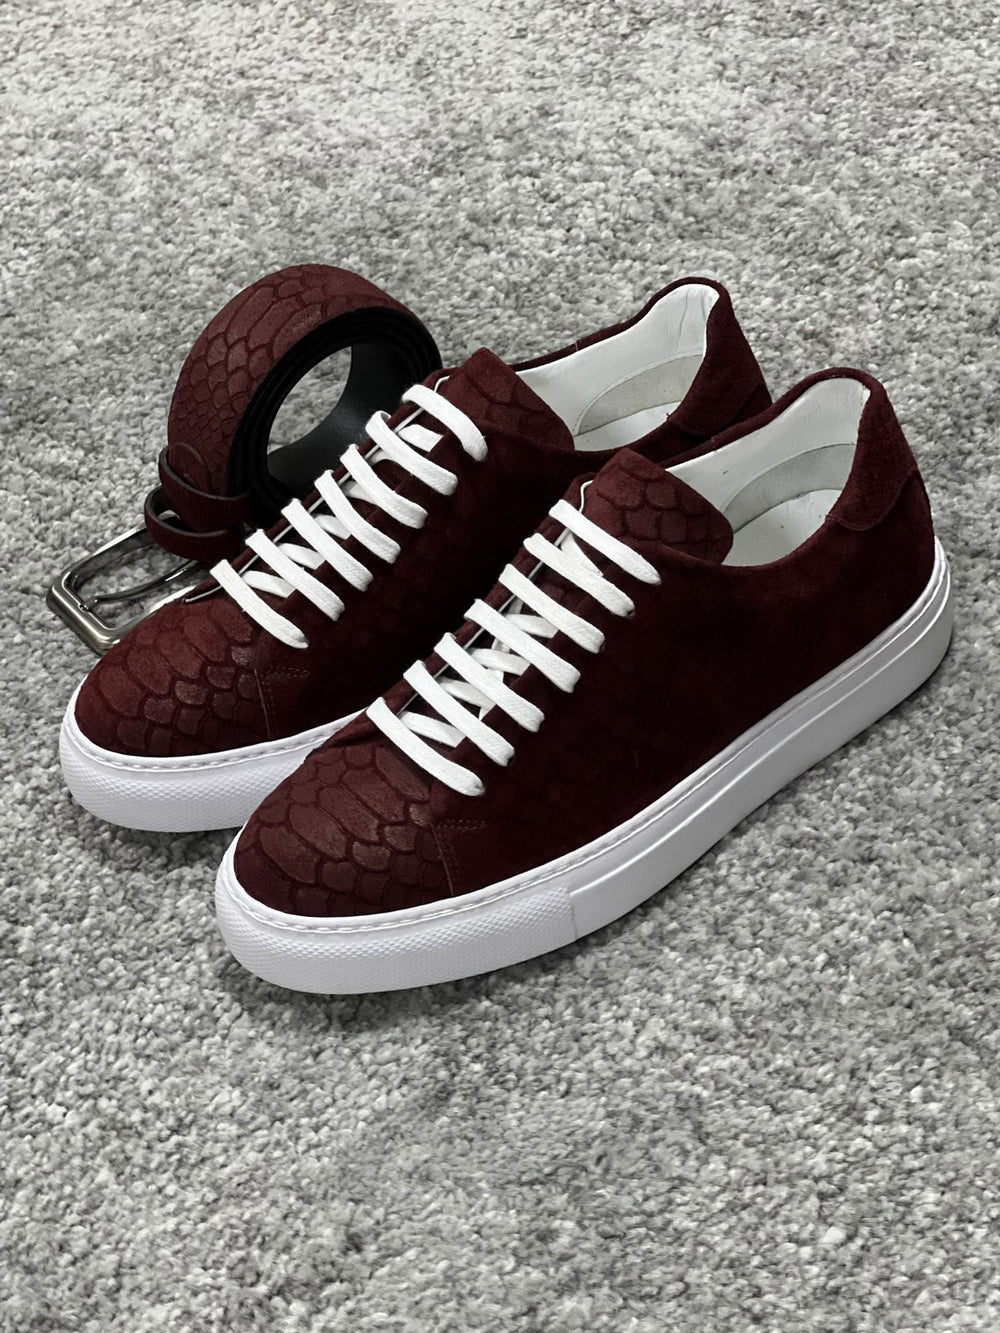 Rubner sole Lace-up suede print leather Burgundy